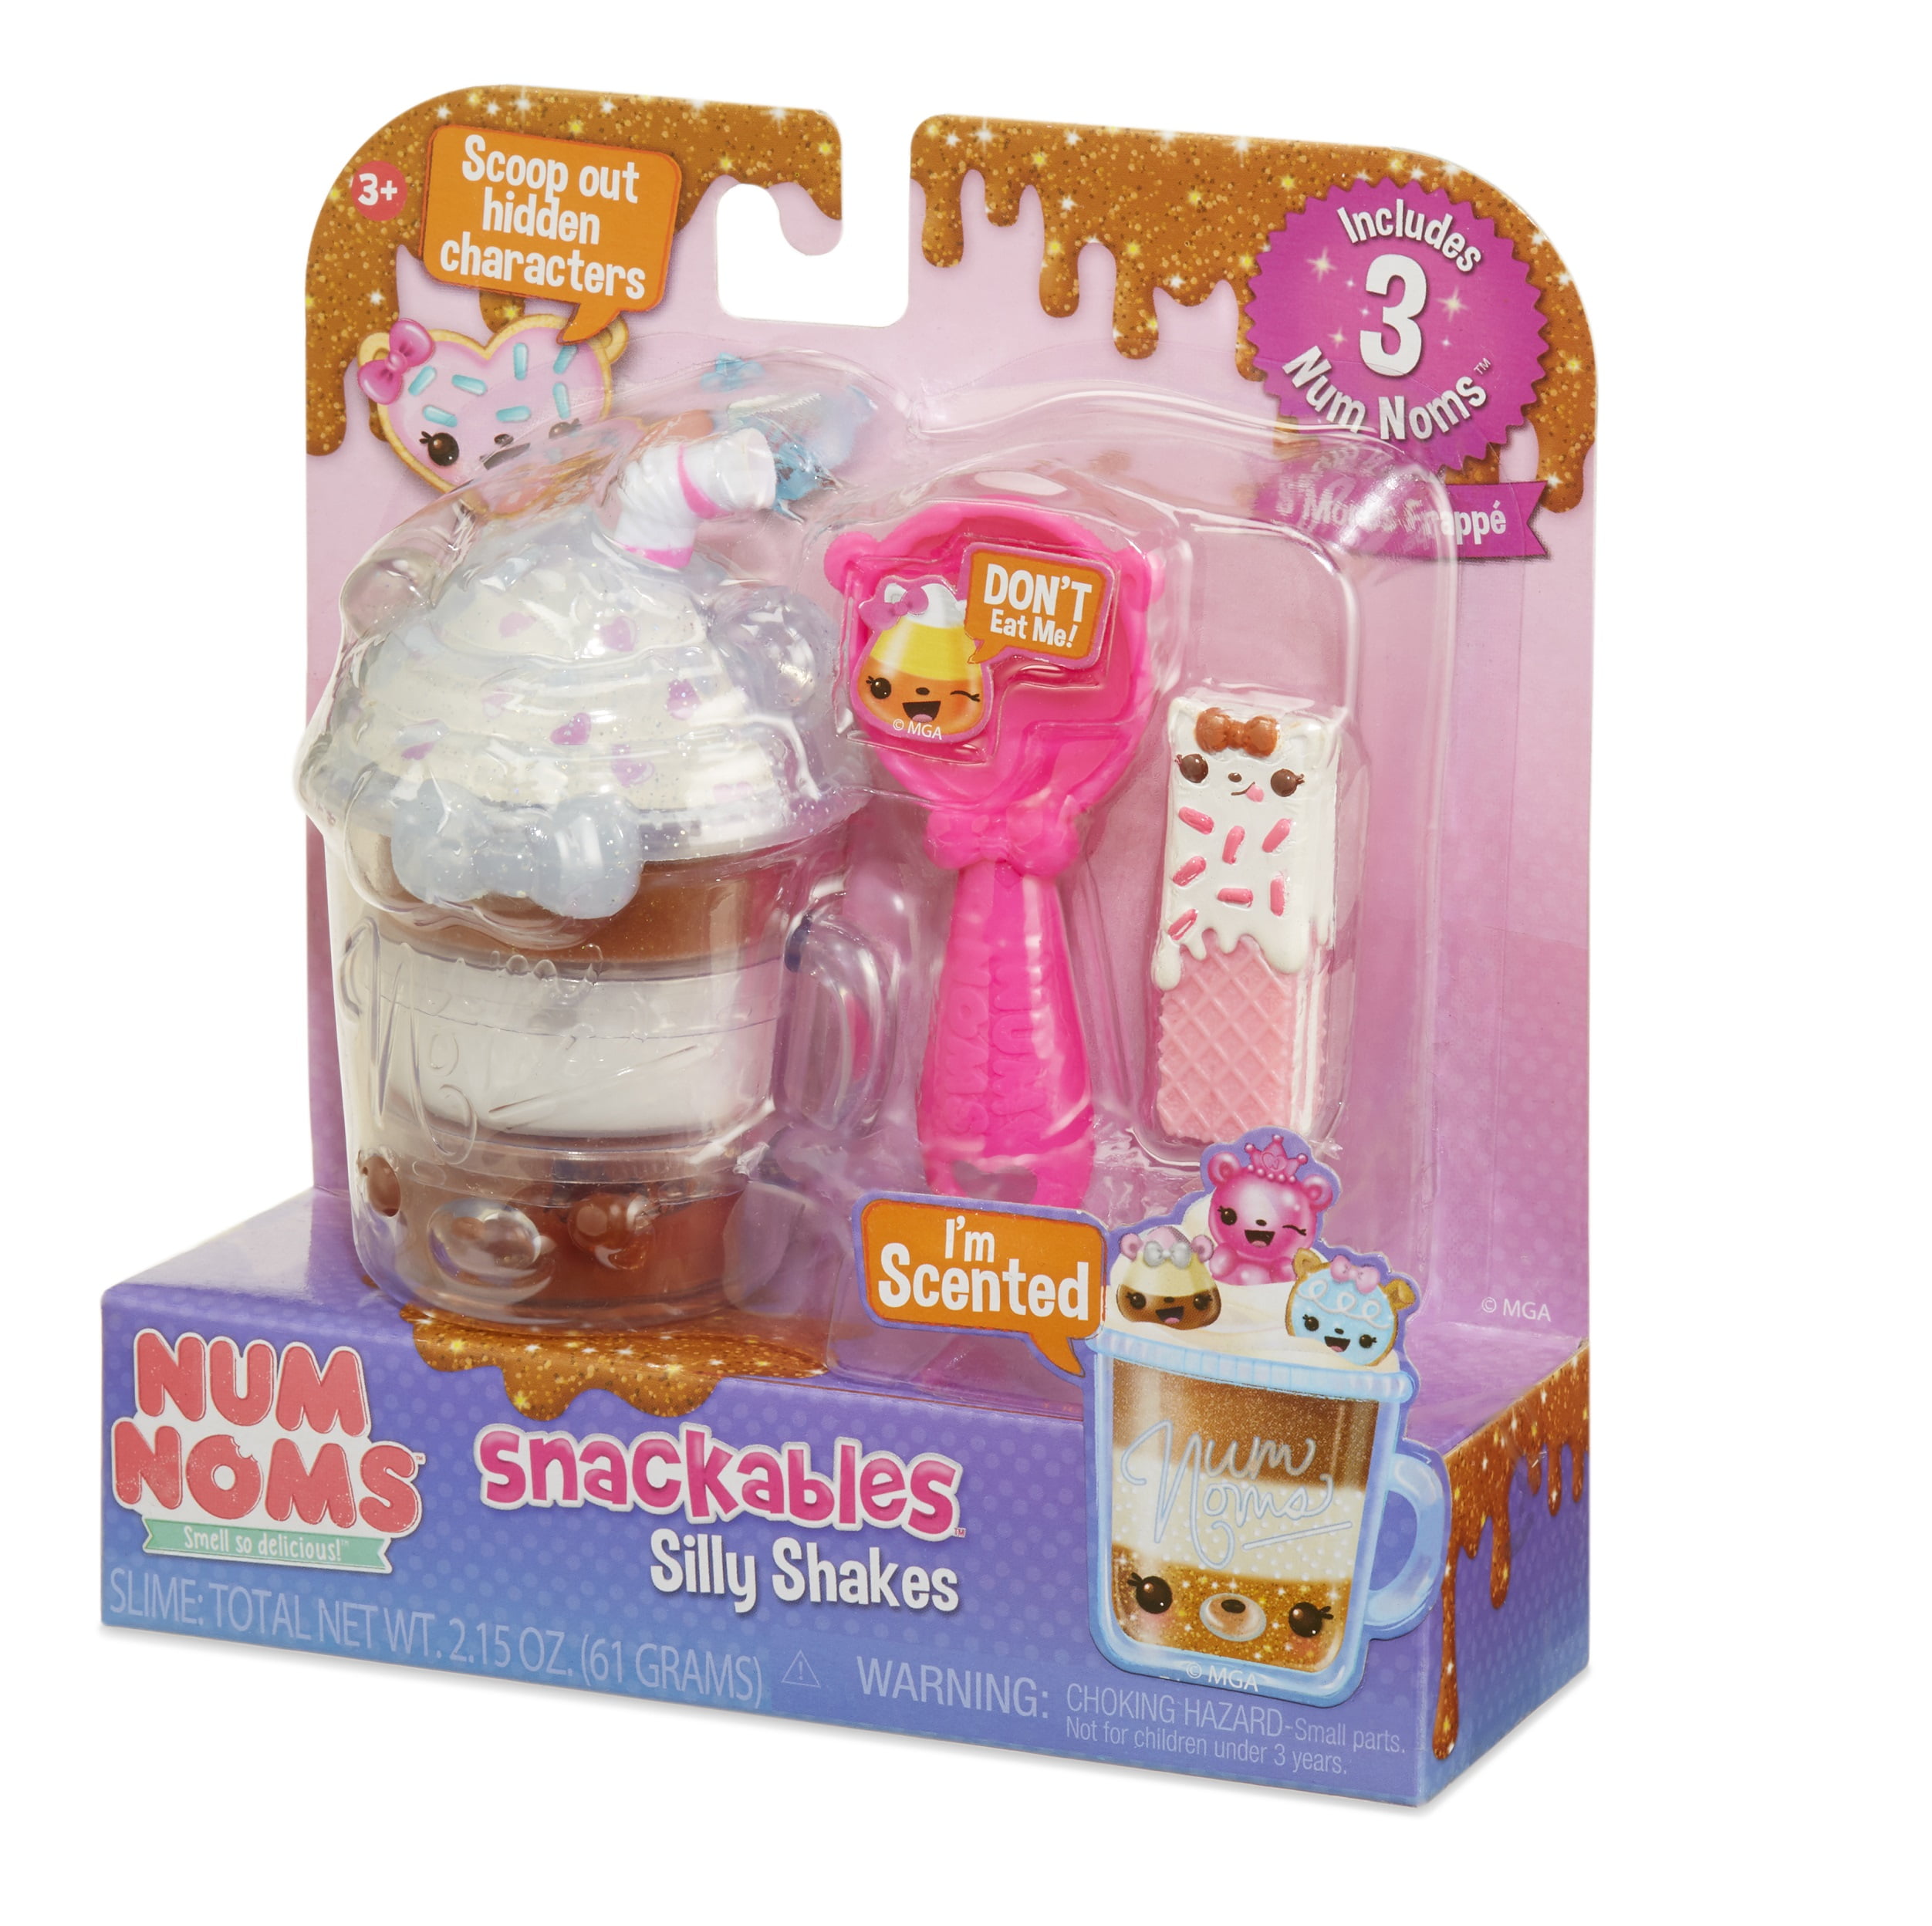  Num Noms 554370 Snackables Silly Shakes- Neapolitan